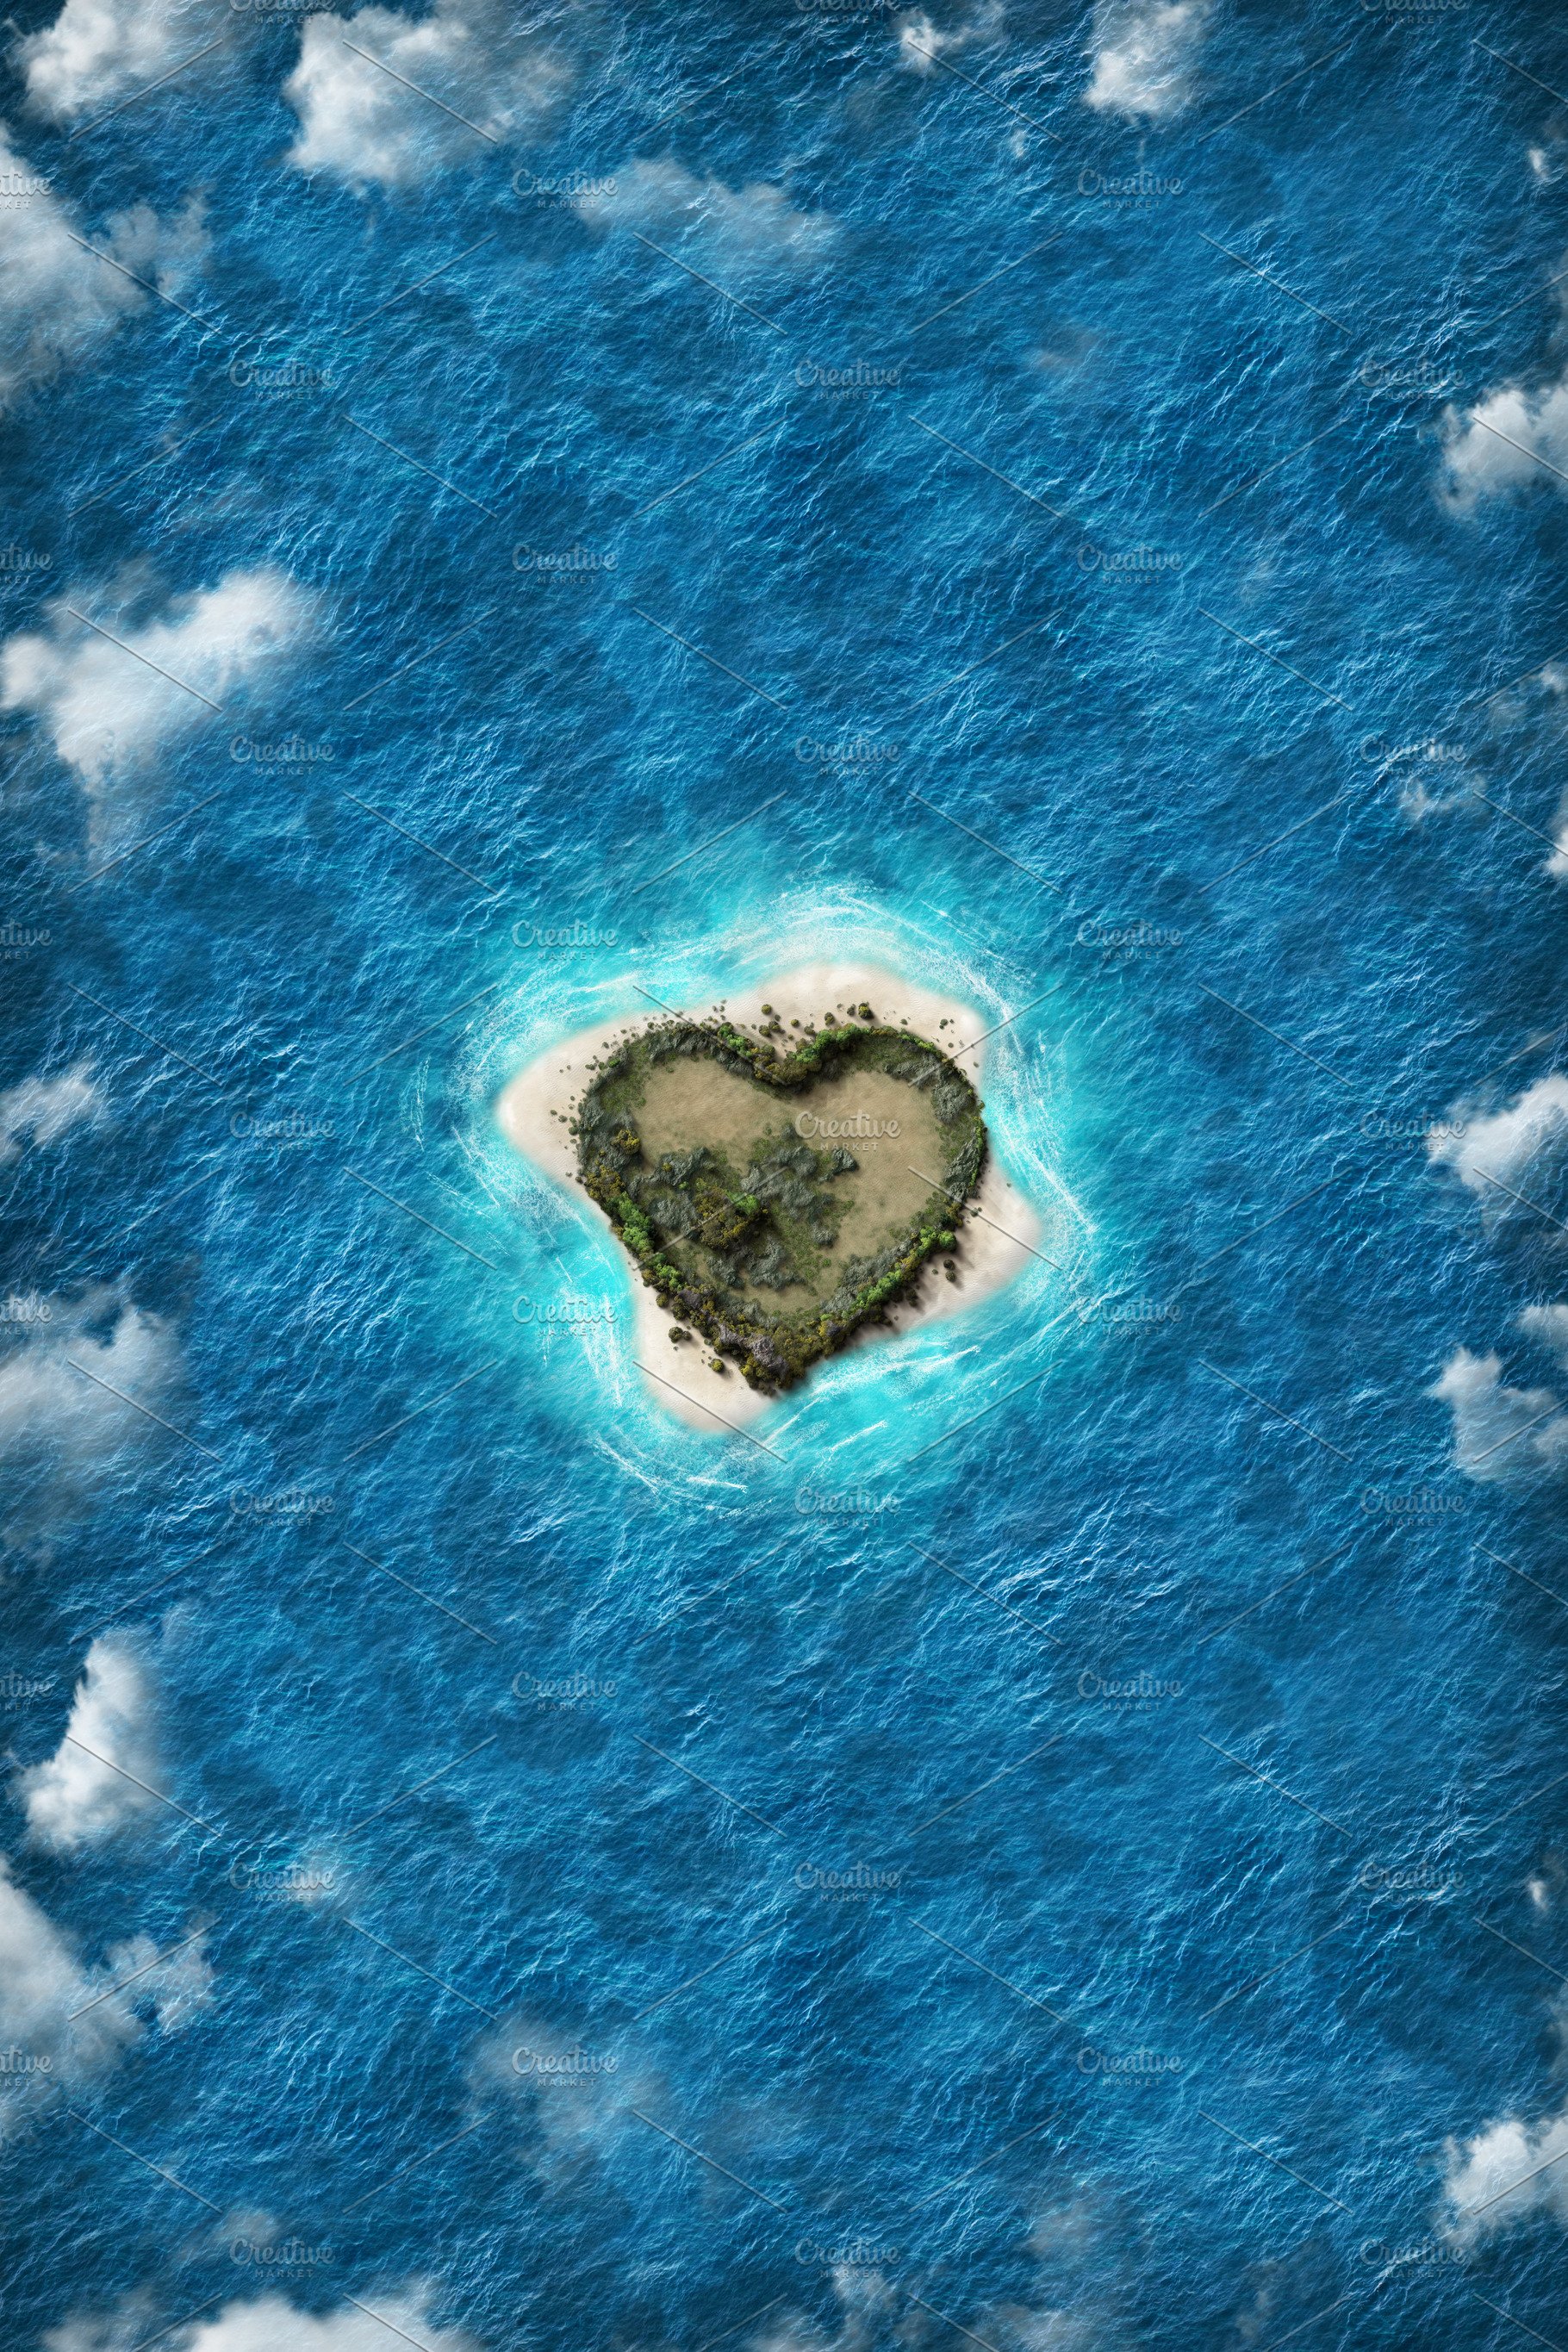 Island in the shape of a heart